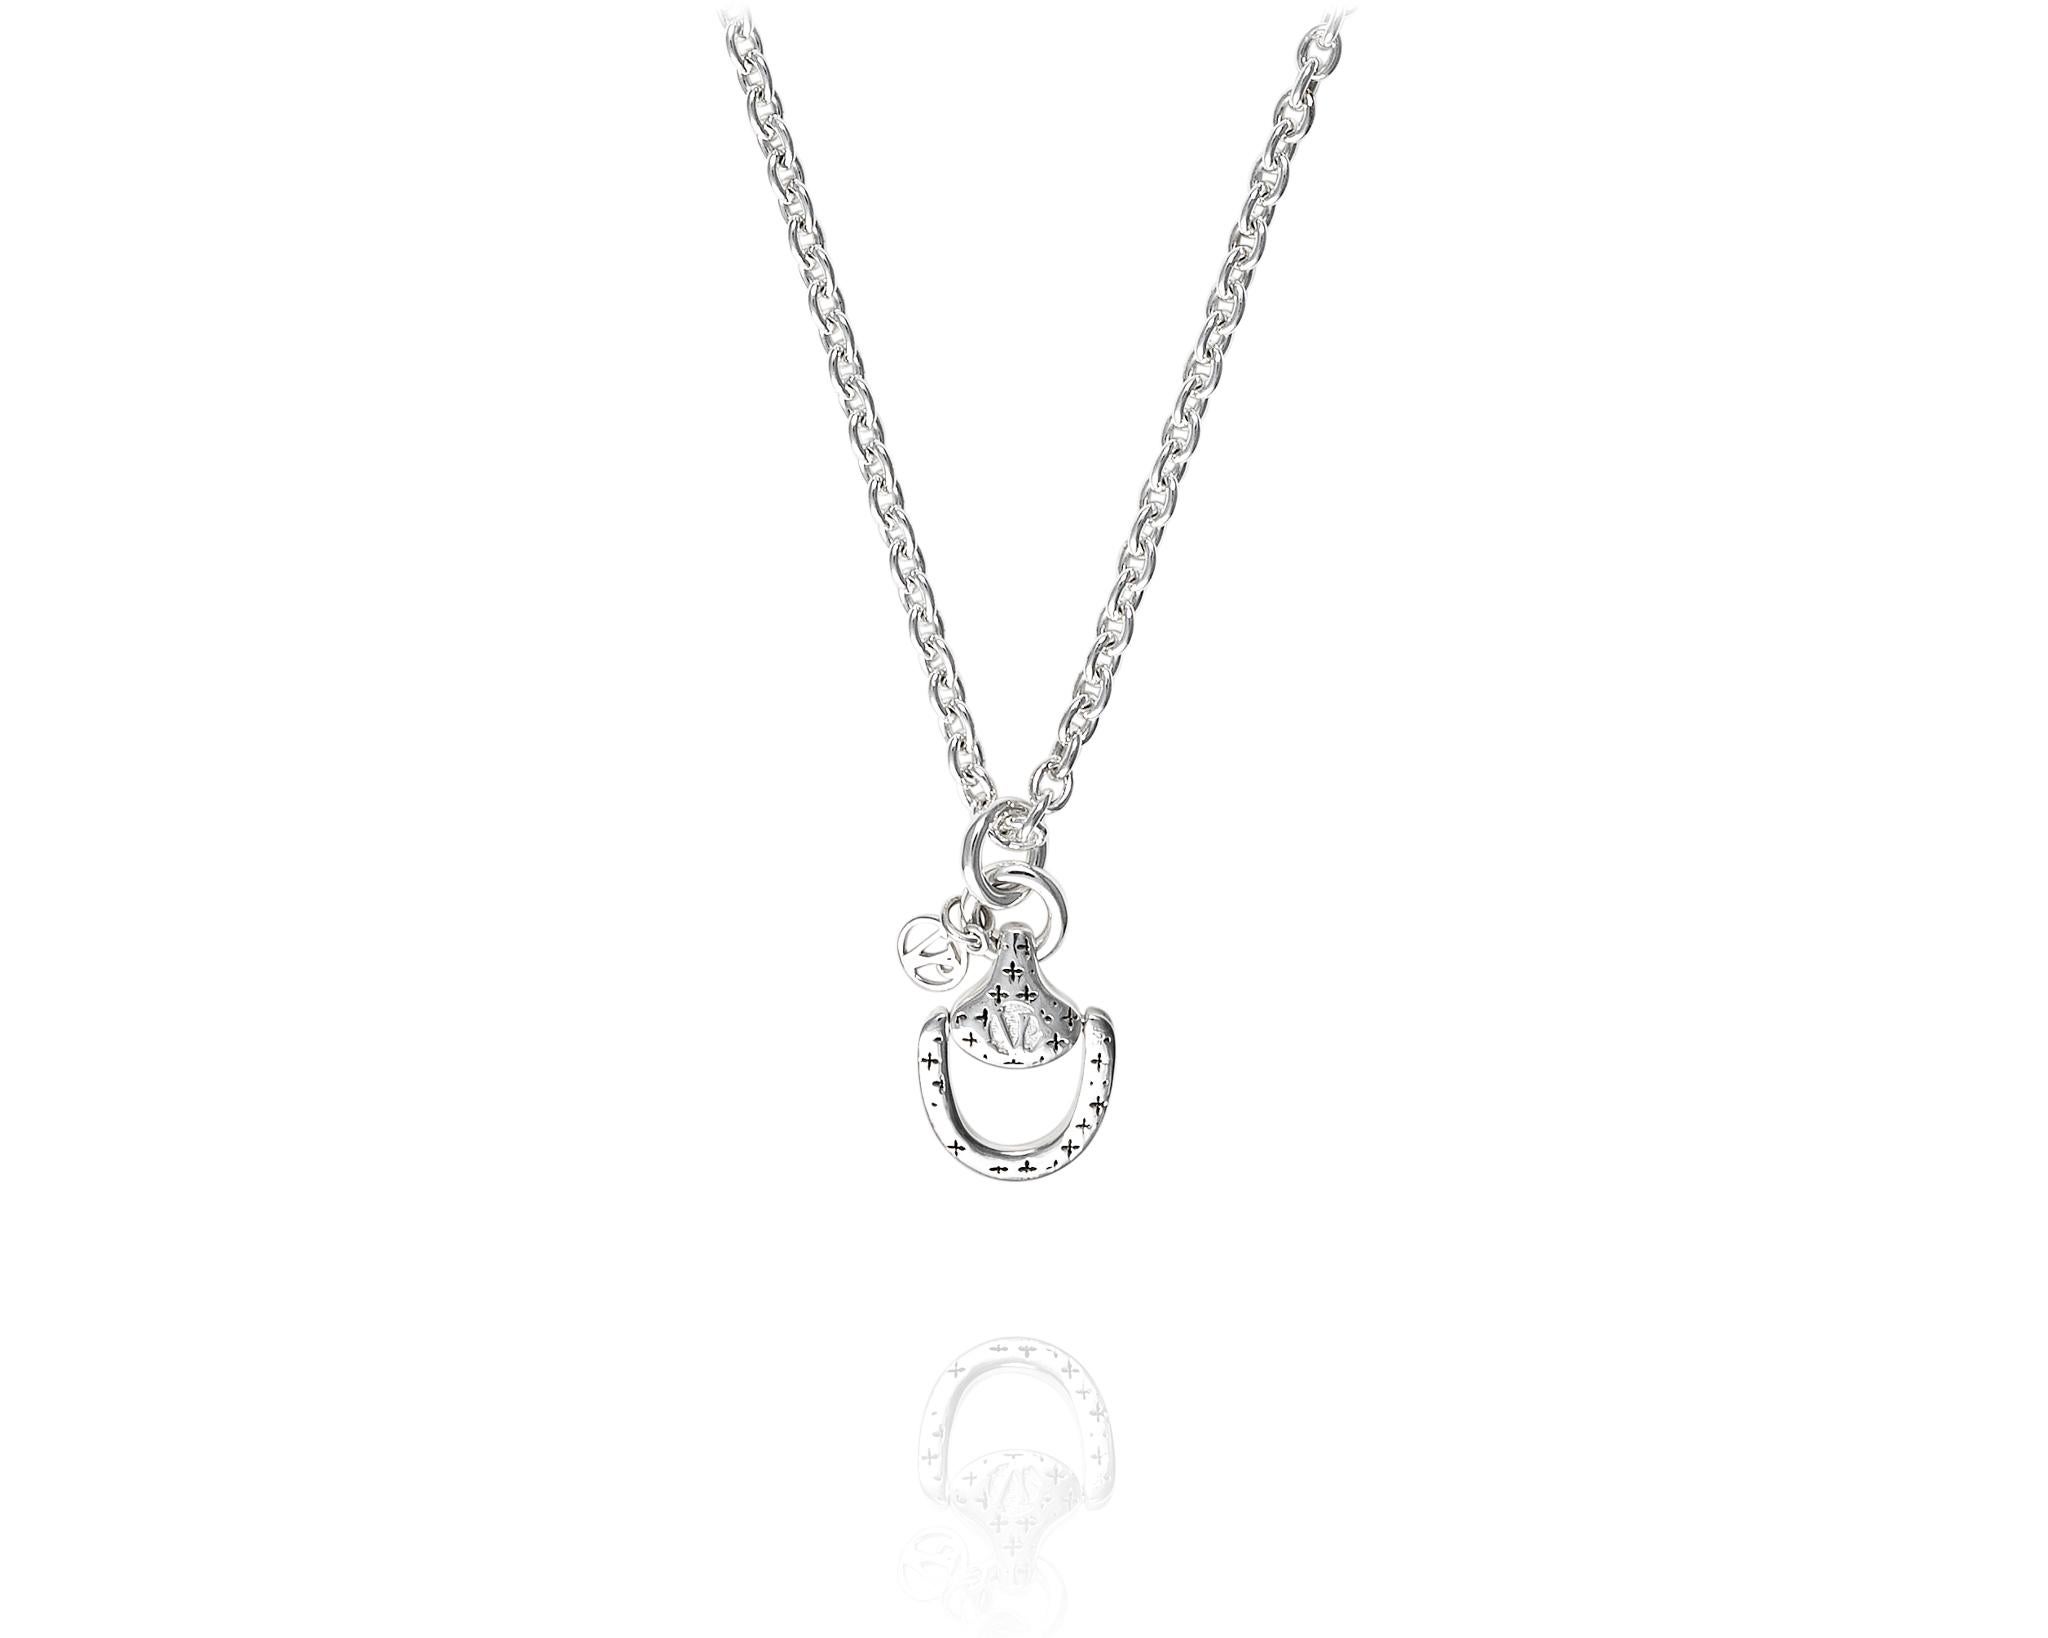 Part of the Vincent Peach Equestrian Collection, the original Churchill Downs Necklace has a Sterling Silver Chain with a Sterling Silver Bit, the signature VP design on the back, and a dangling VP Charm. This necklace comes in the Standard 17